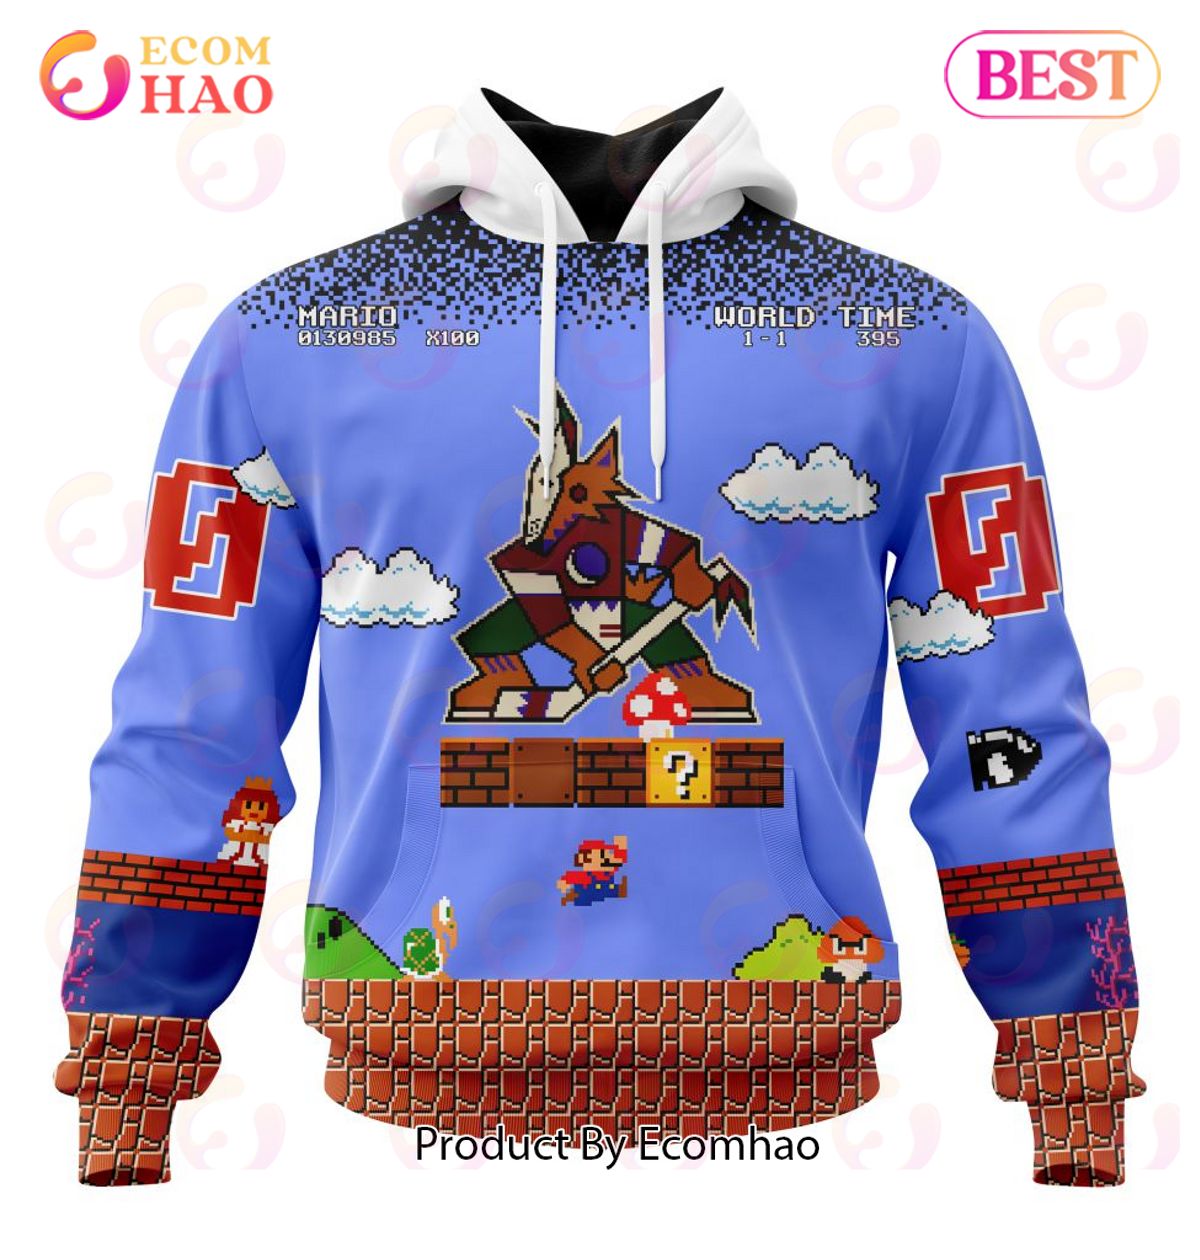 NHL Arizona Coyotes Special Kits With Super Mario Game Design 3D Hoodie